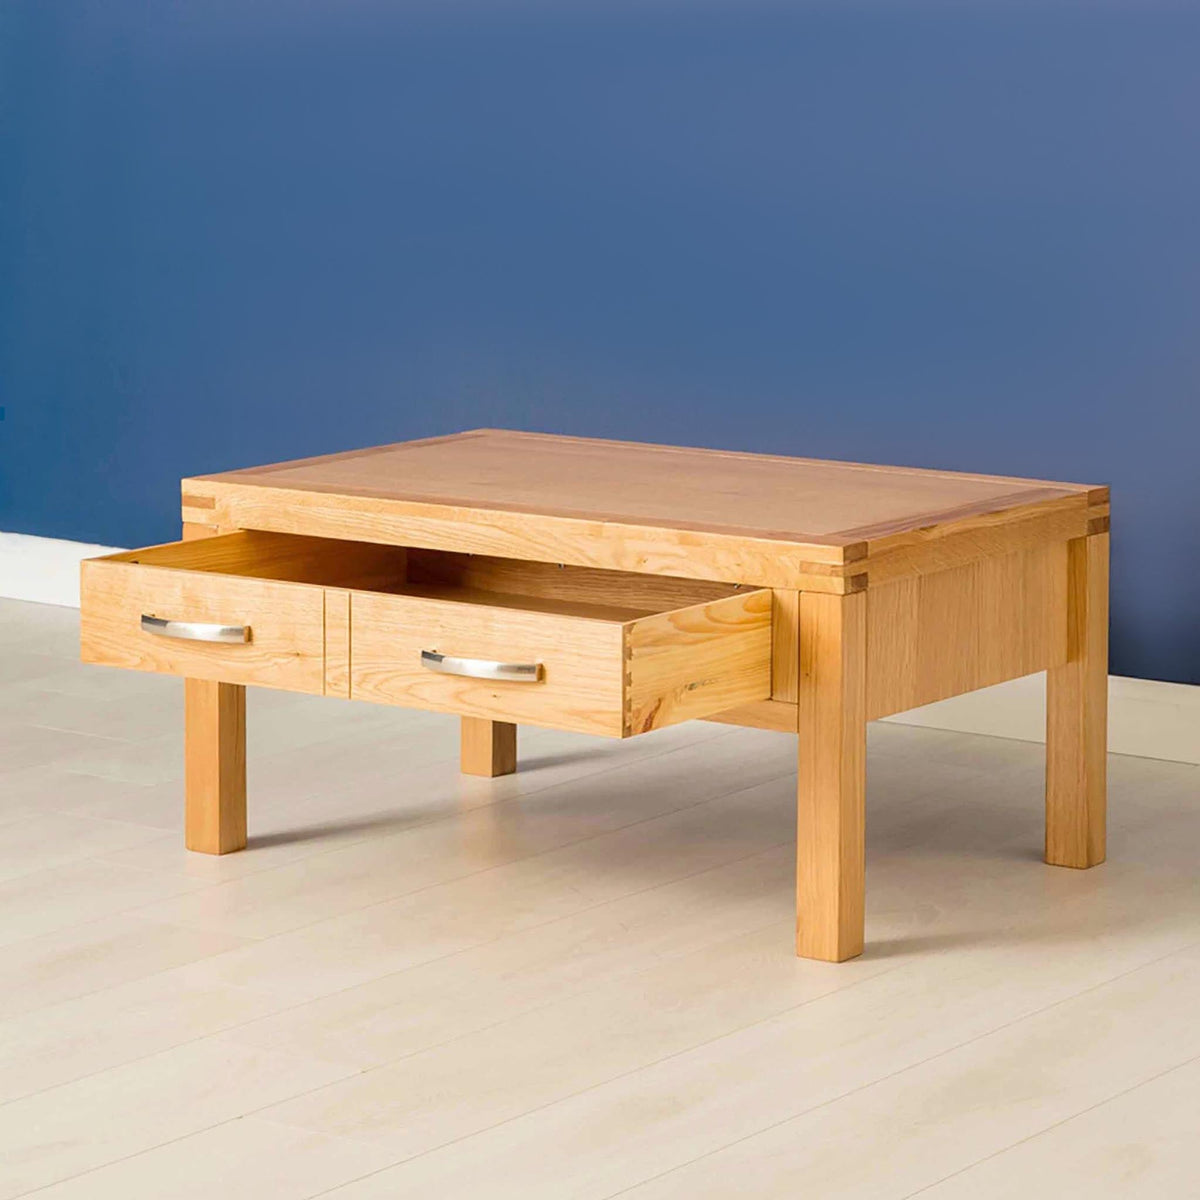 Abbey Light Oak Coffee Table - Lifestyle side view with drawer open